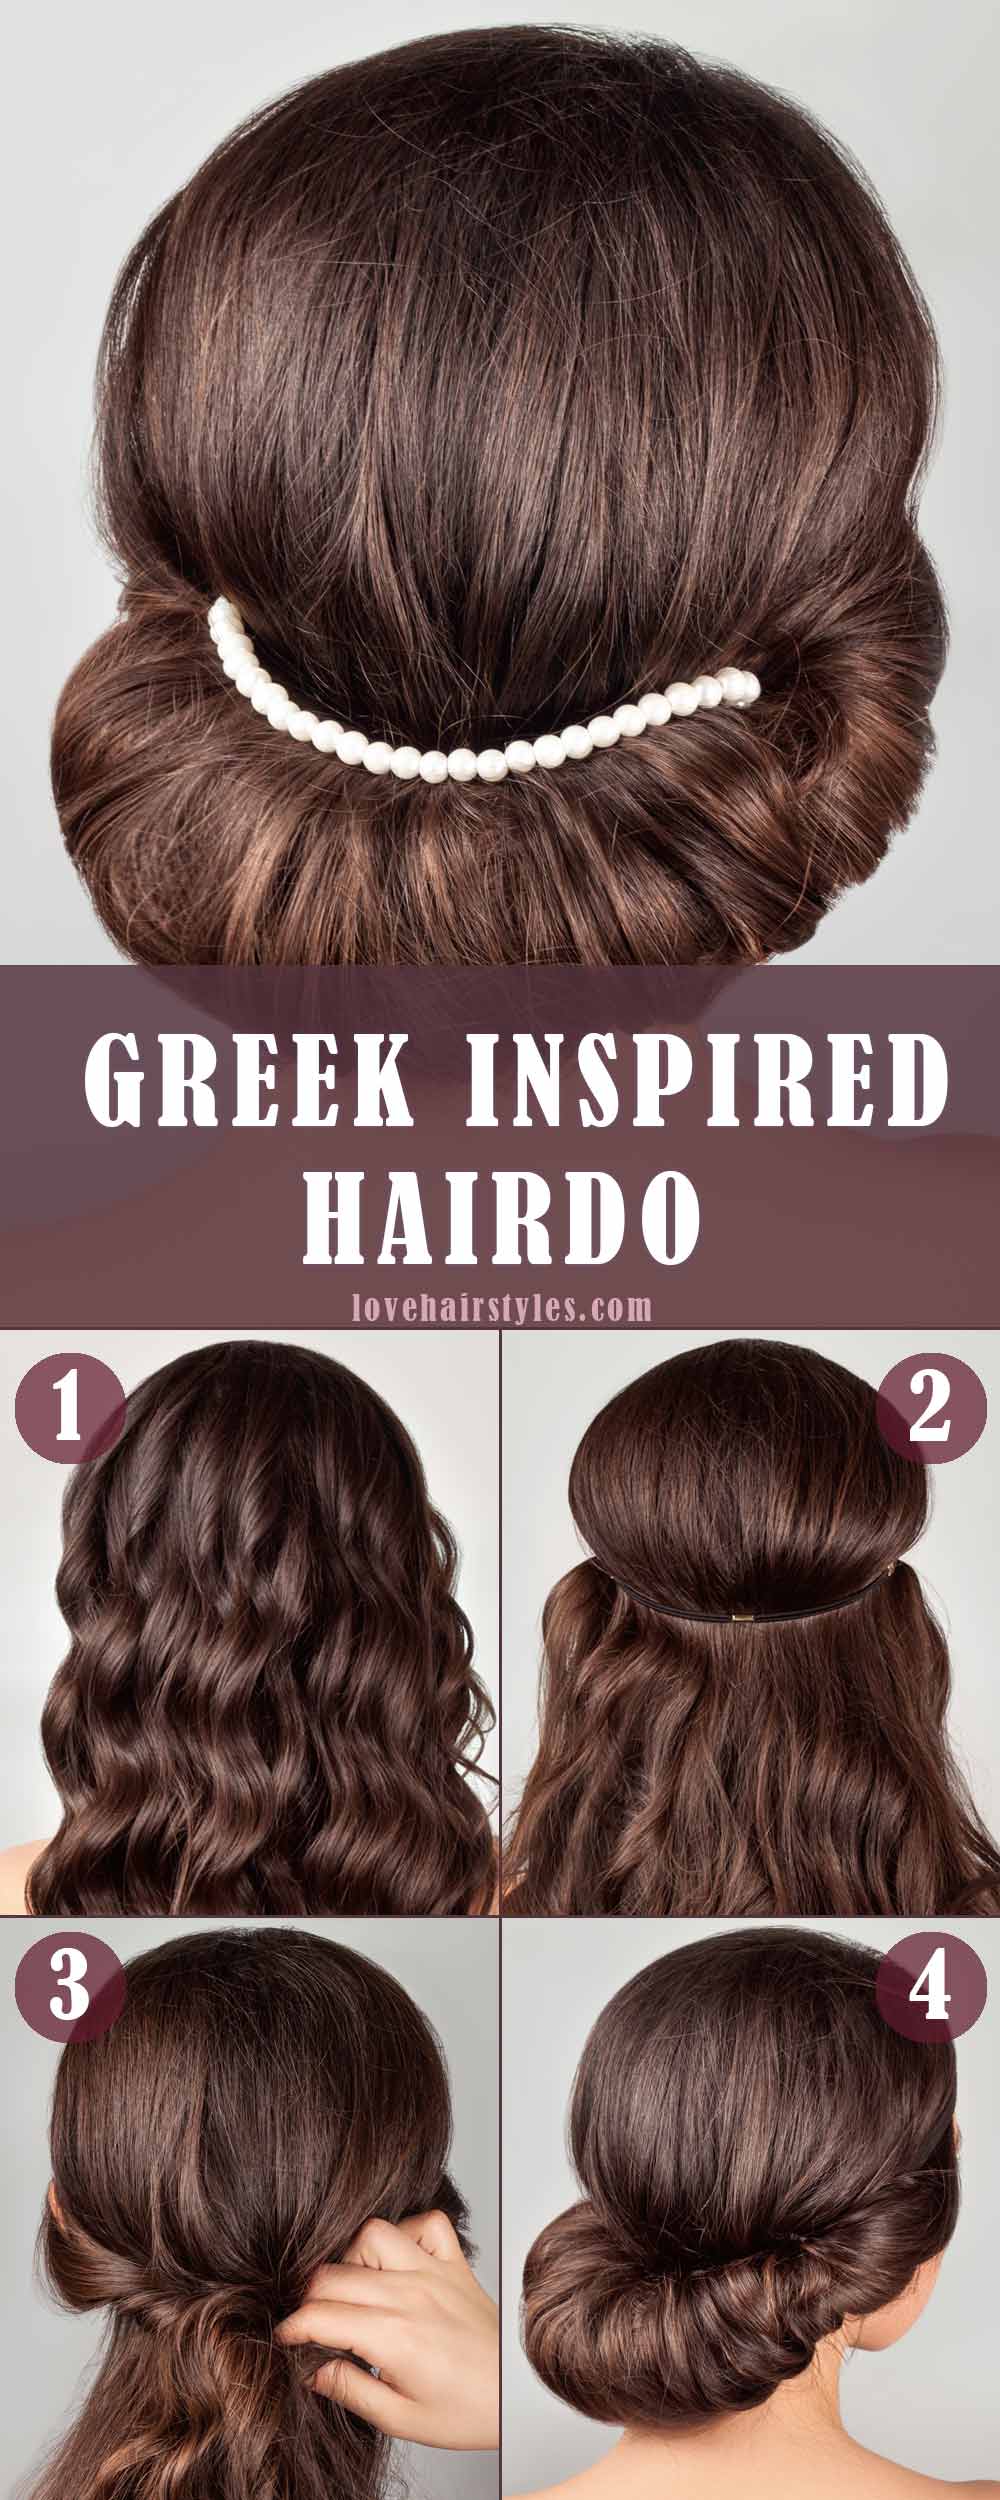 Greek Inspired Hairdo With Hair Accessories